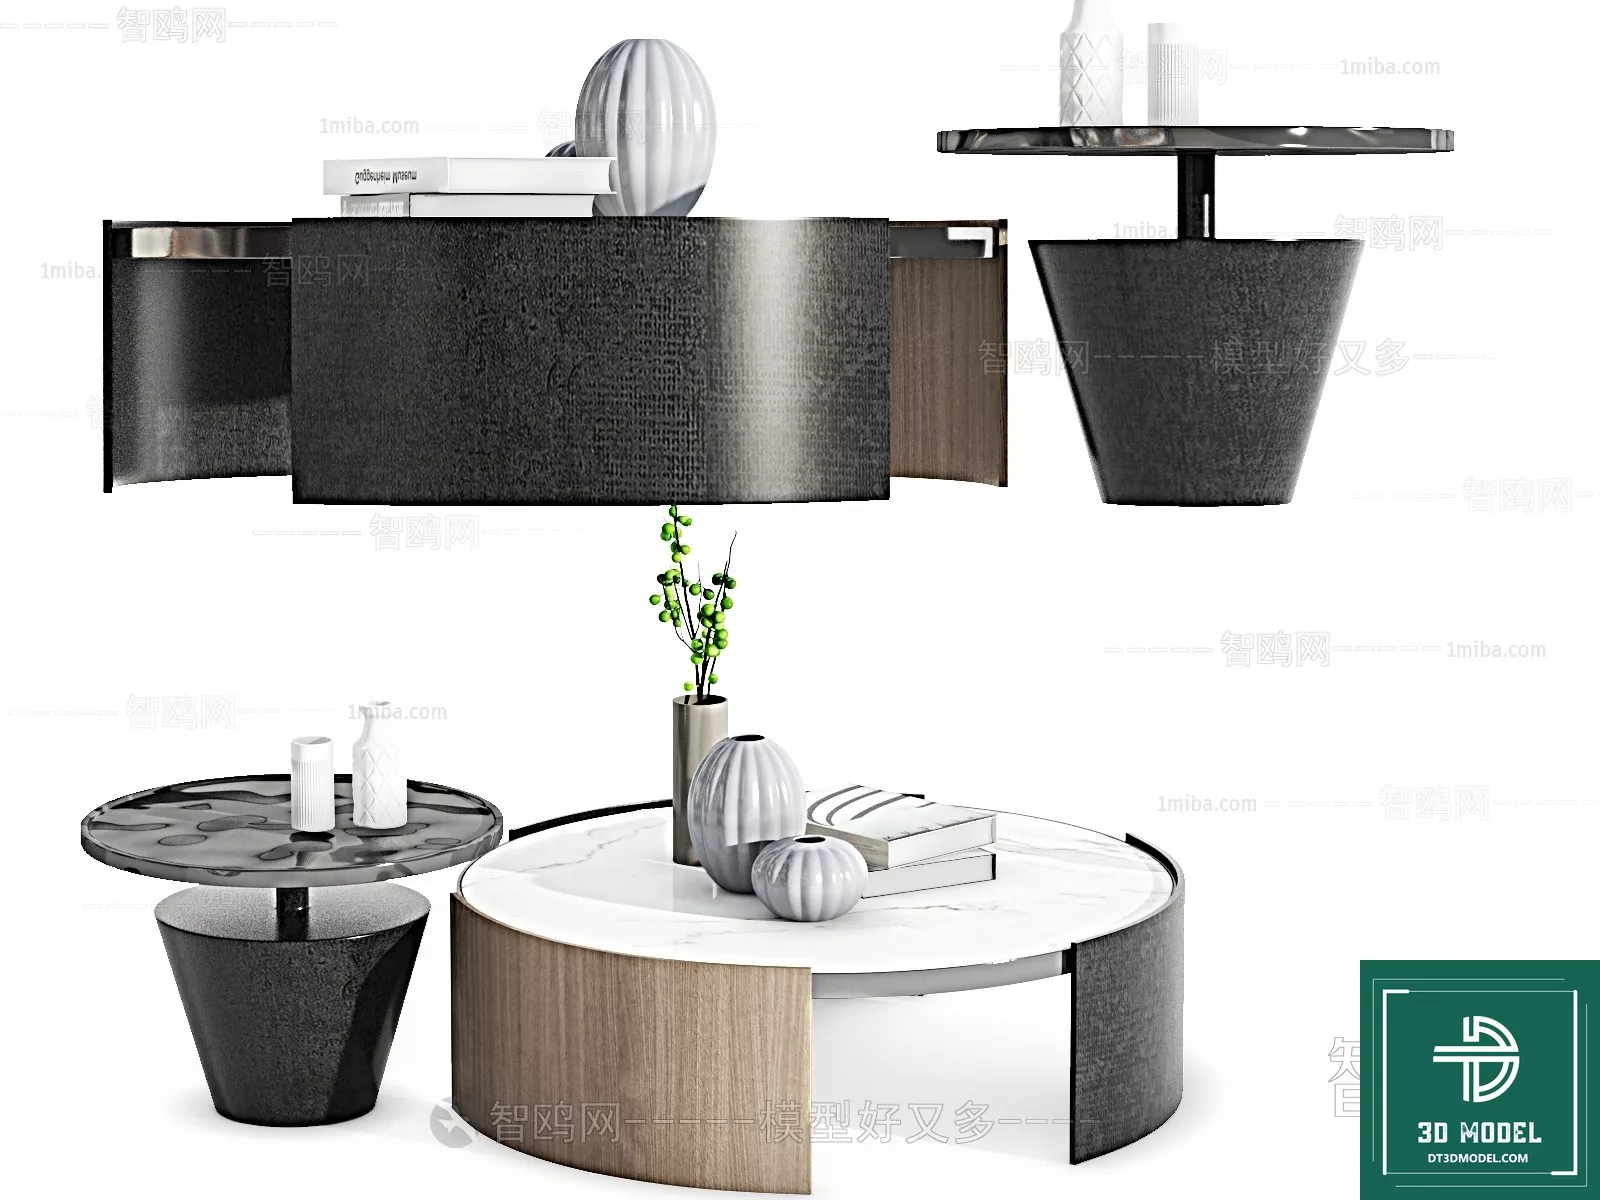 MODERN TEA TABLE - SKETCHUP 3D MODEL - VRAY OR ENSCAPE - ID14988